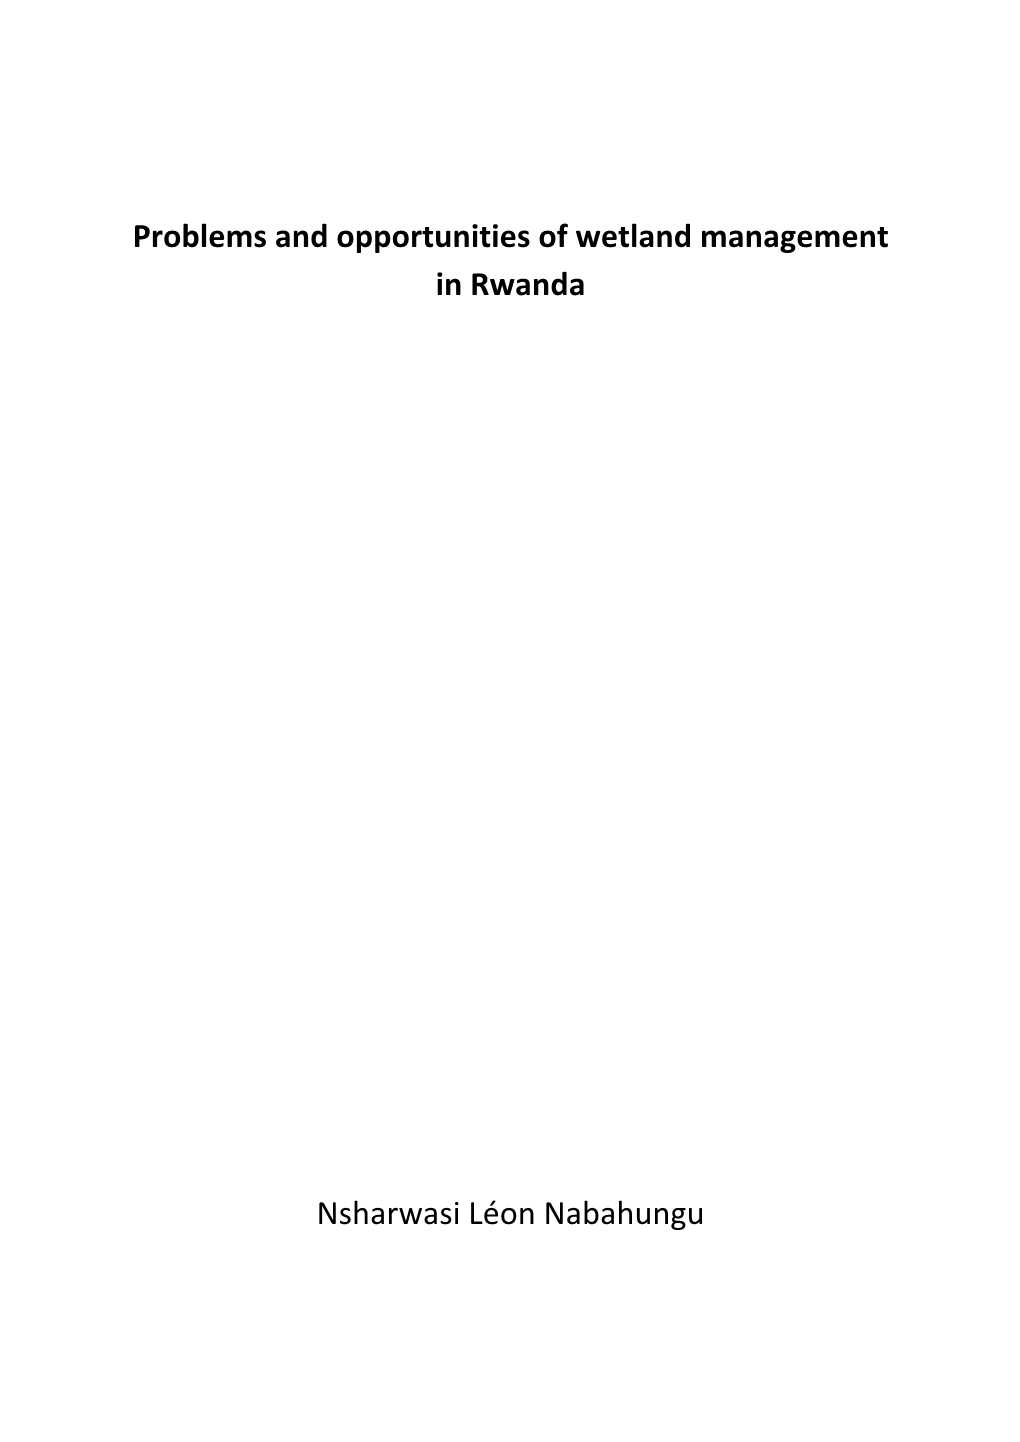 Problems and Opportunities of Wetland Management in Rwanda